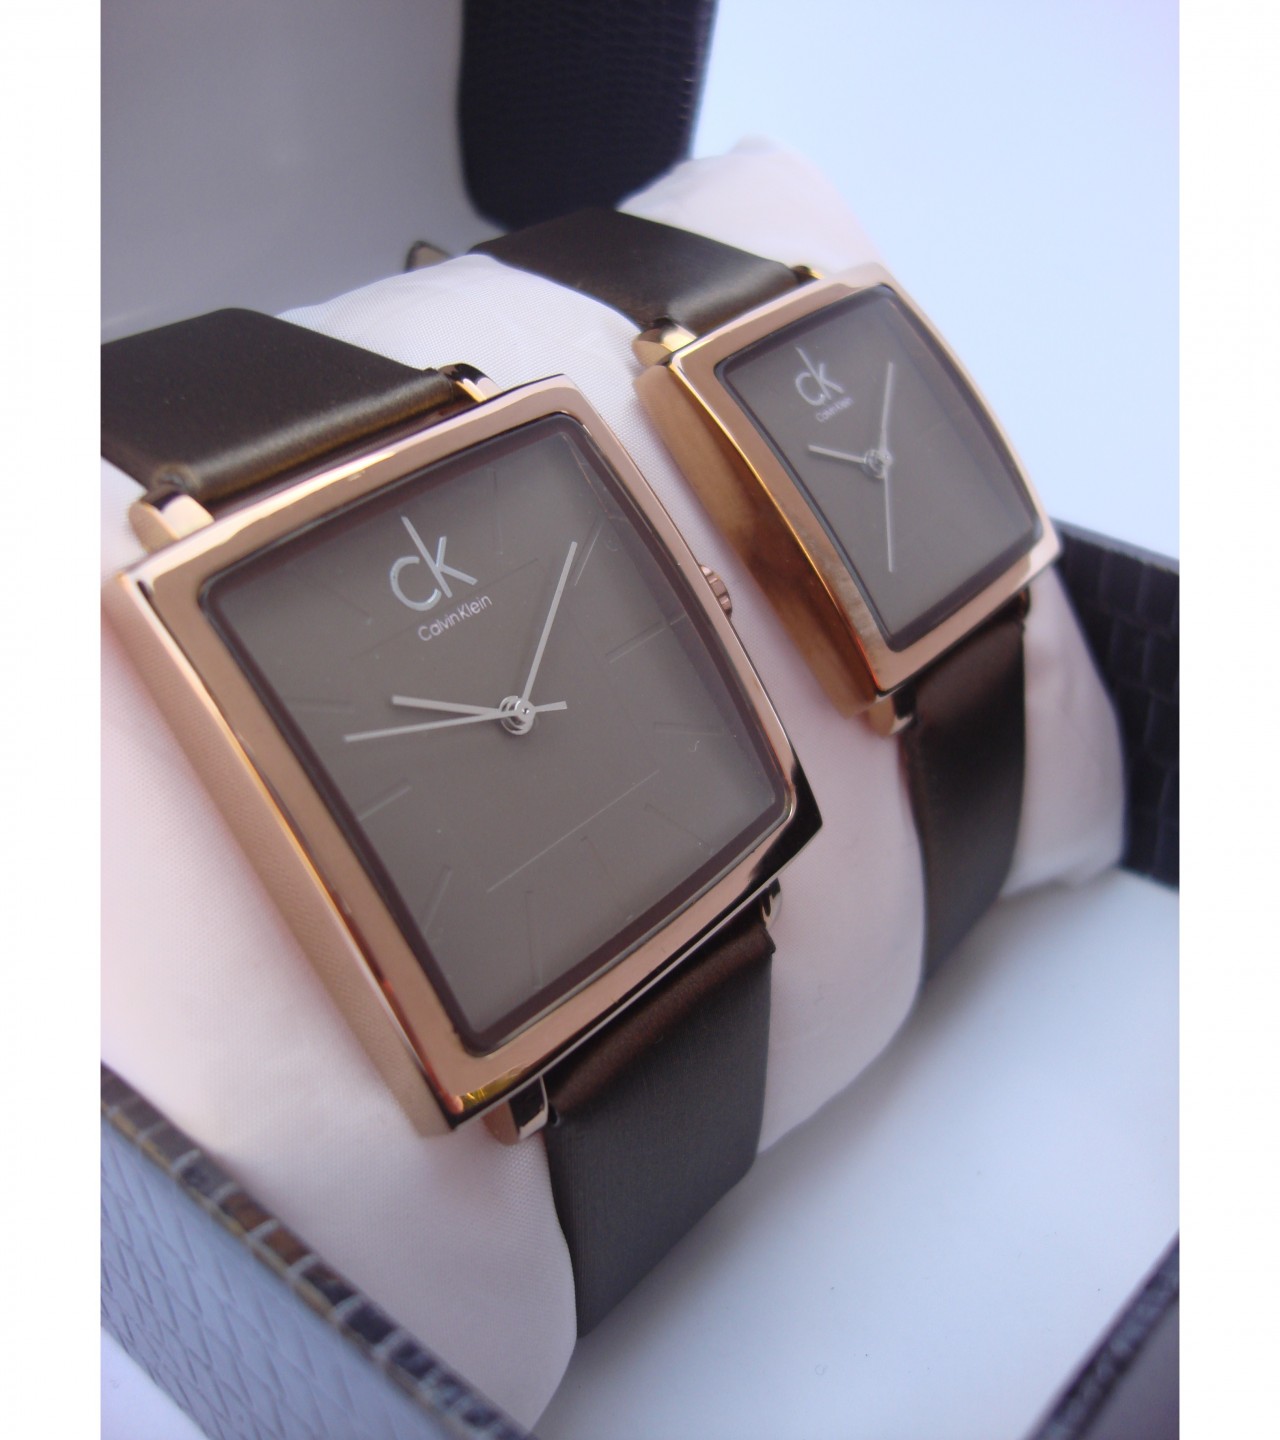 Square Couple watch for loved ones - Copper (GW-032)